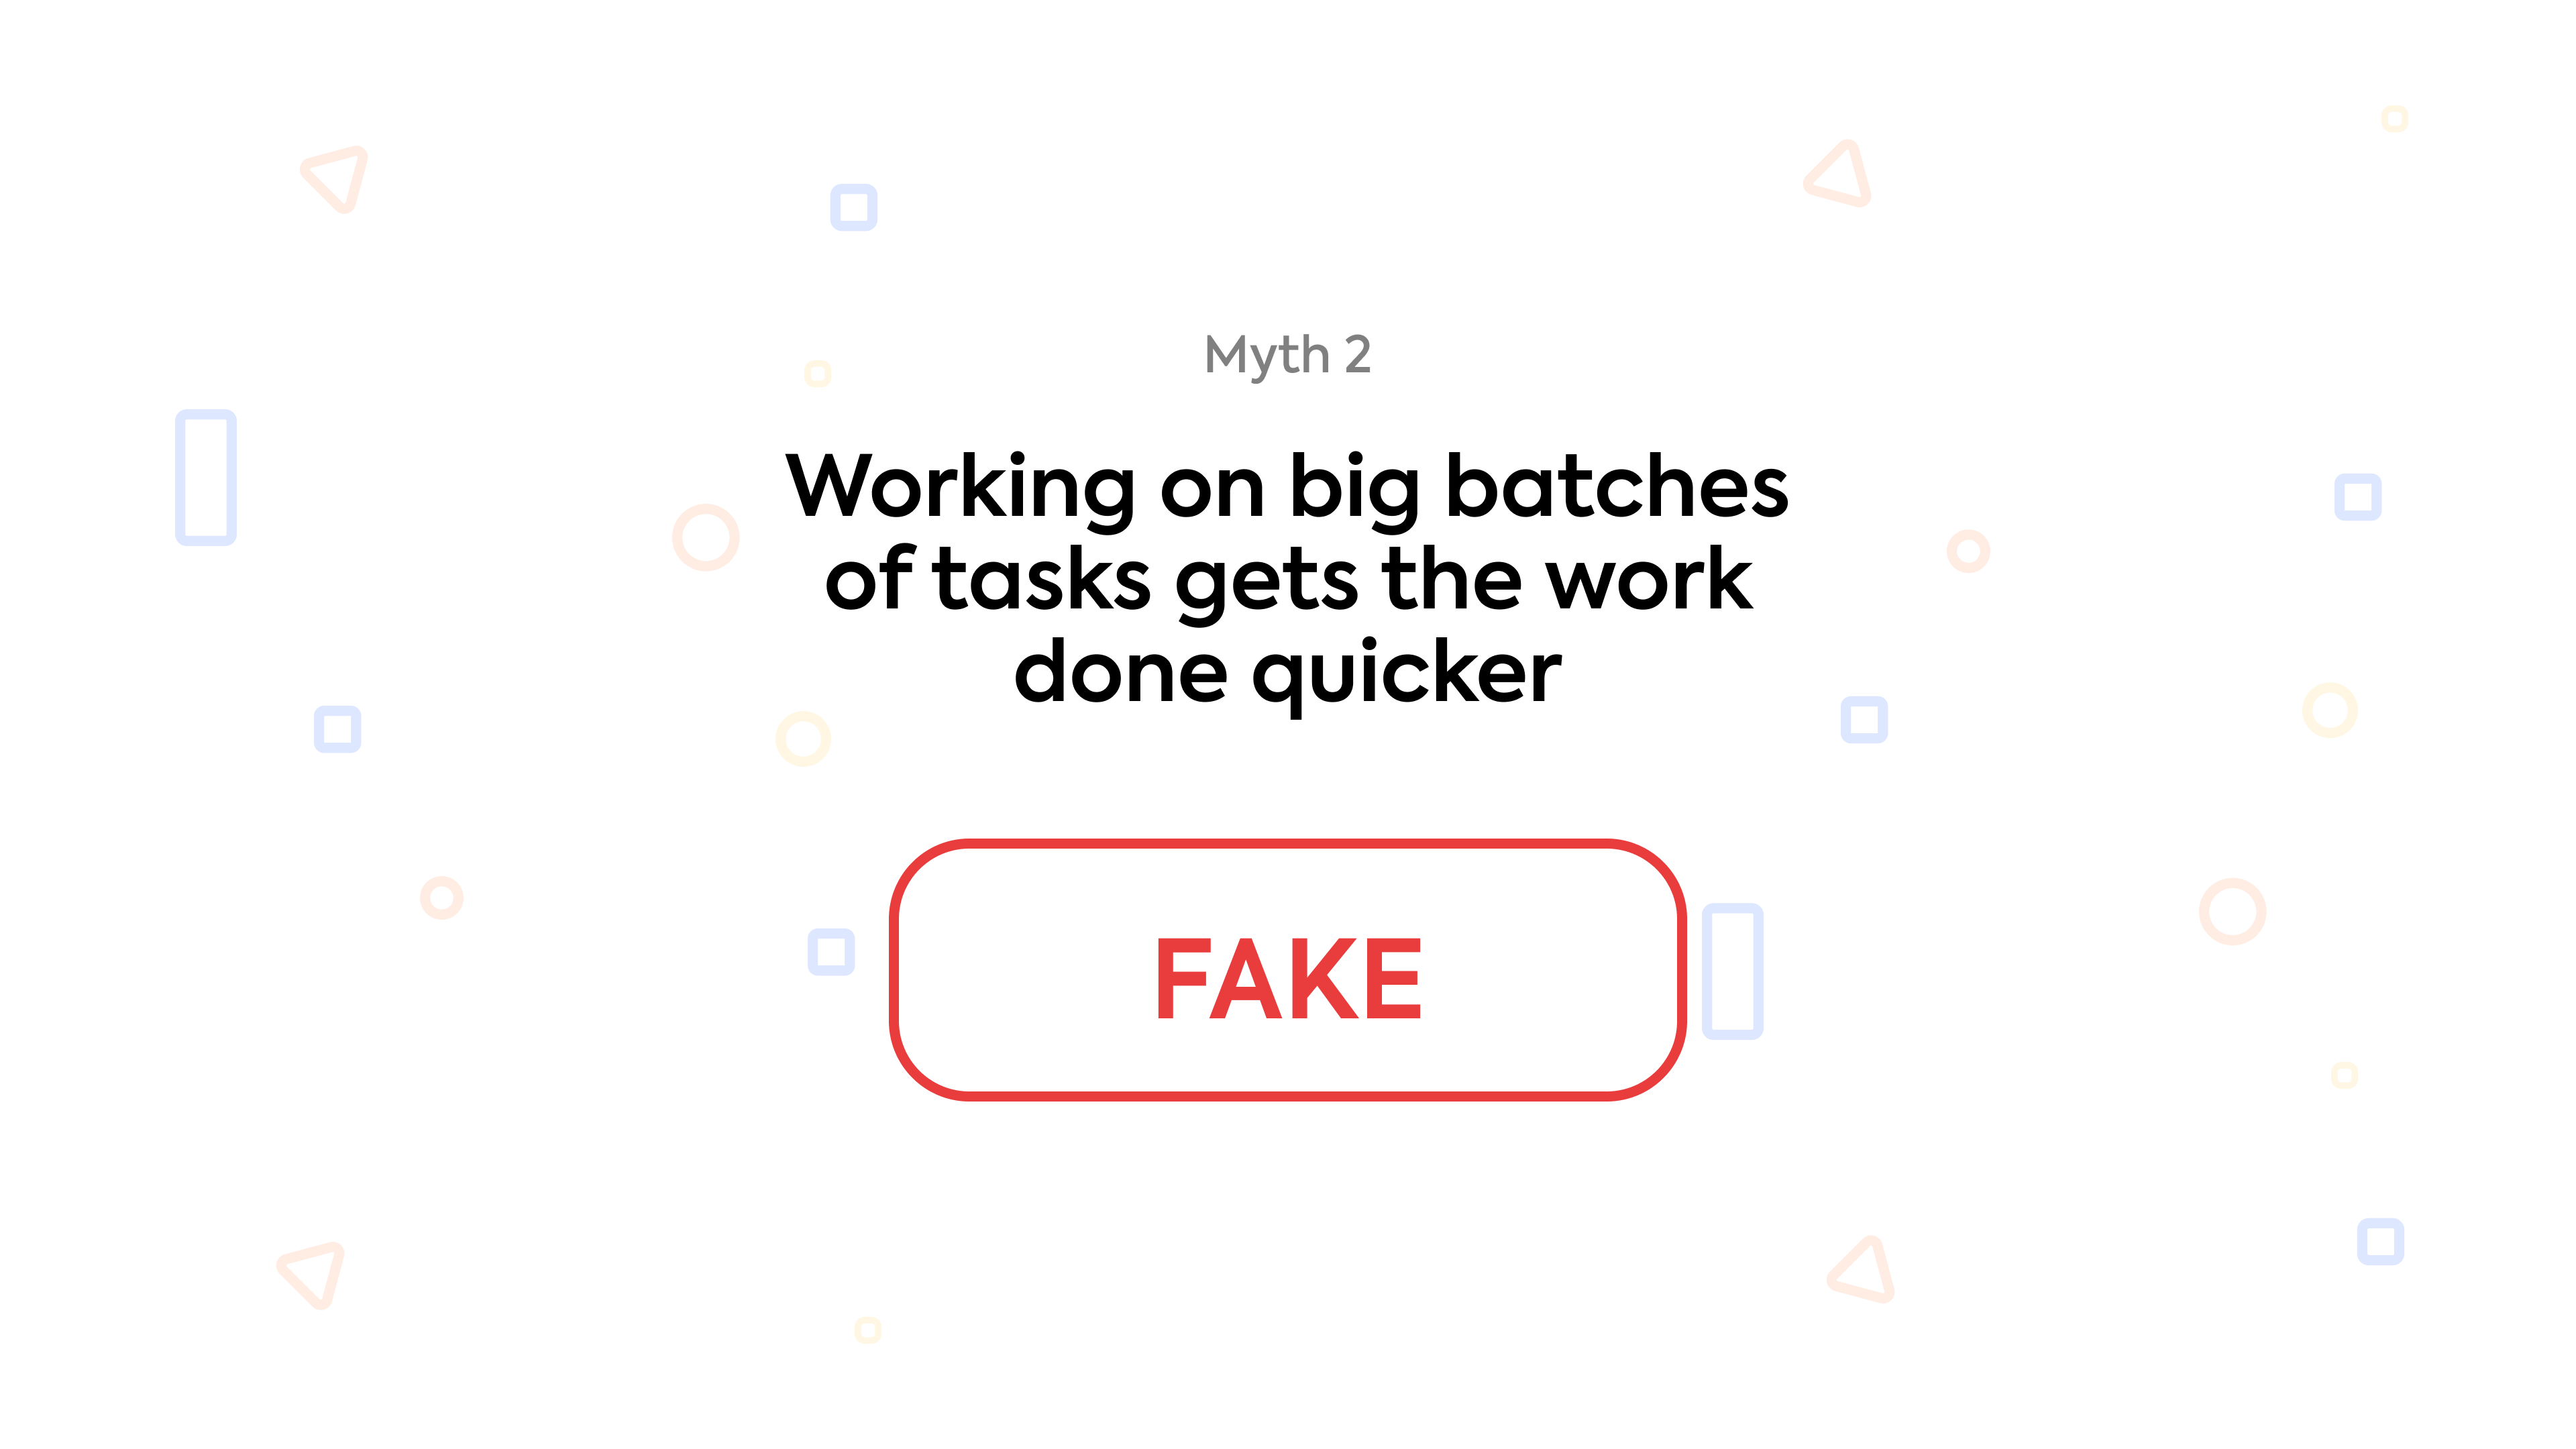 Myth 2: Working on big batches of tasks gets the work done quicker